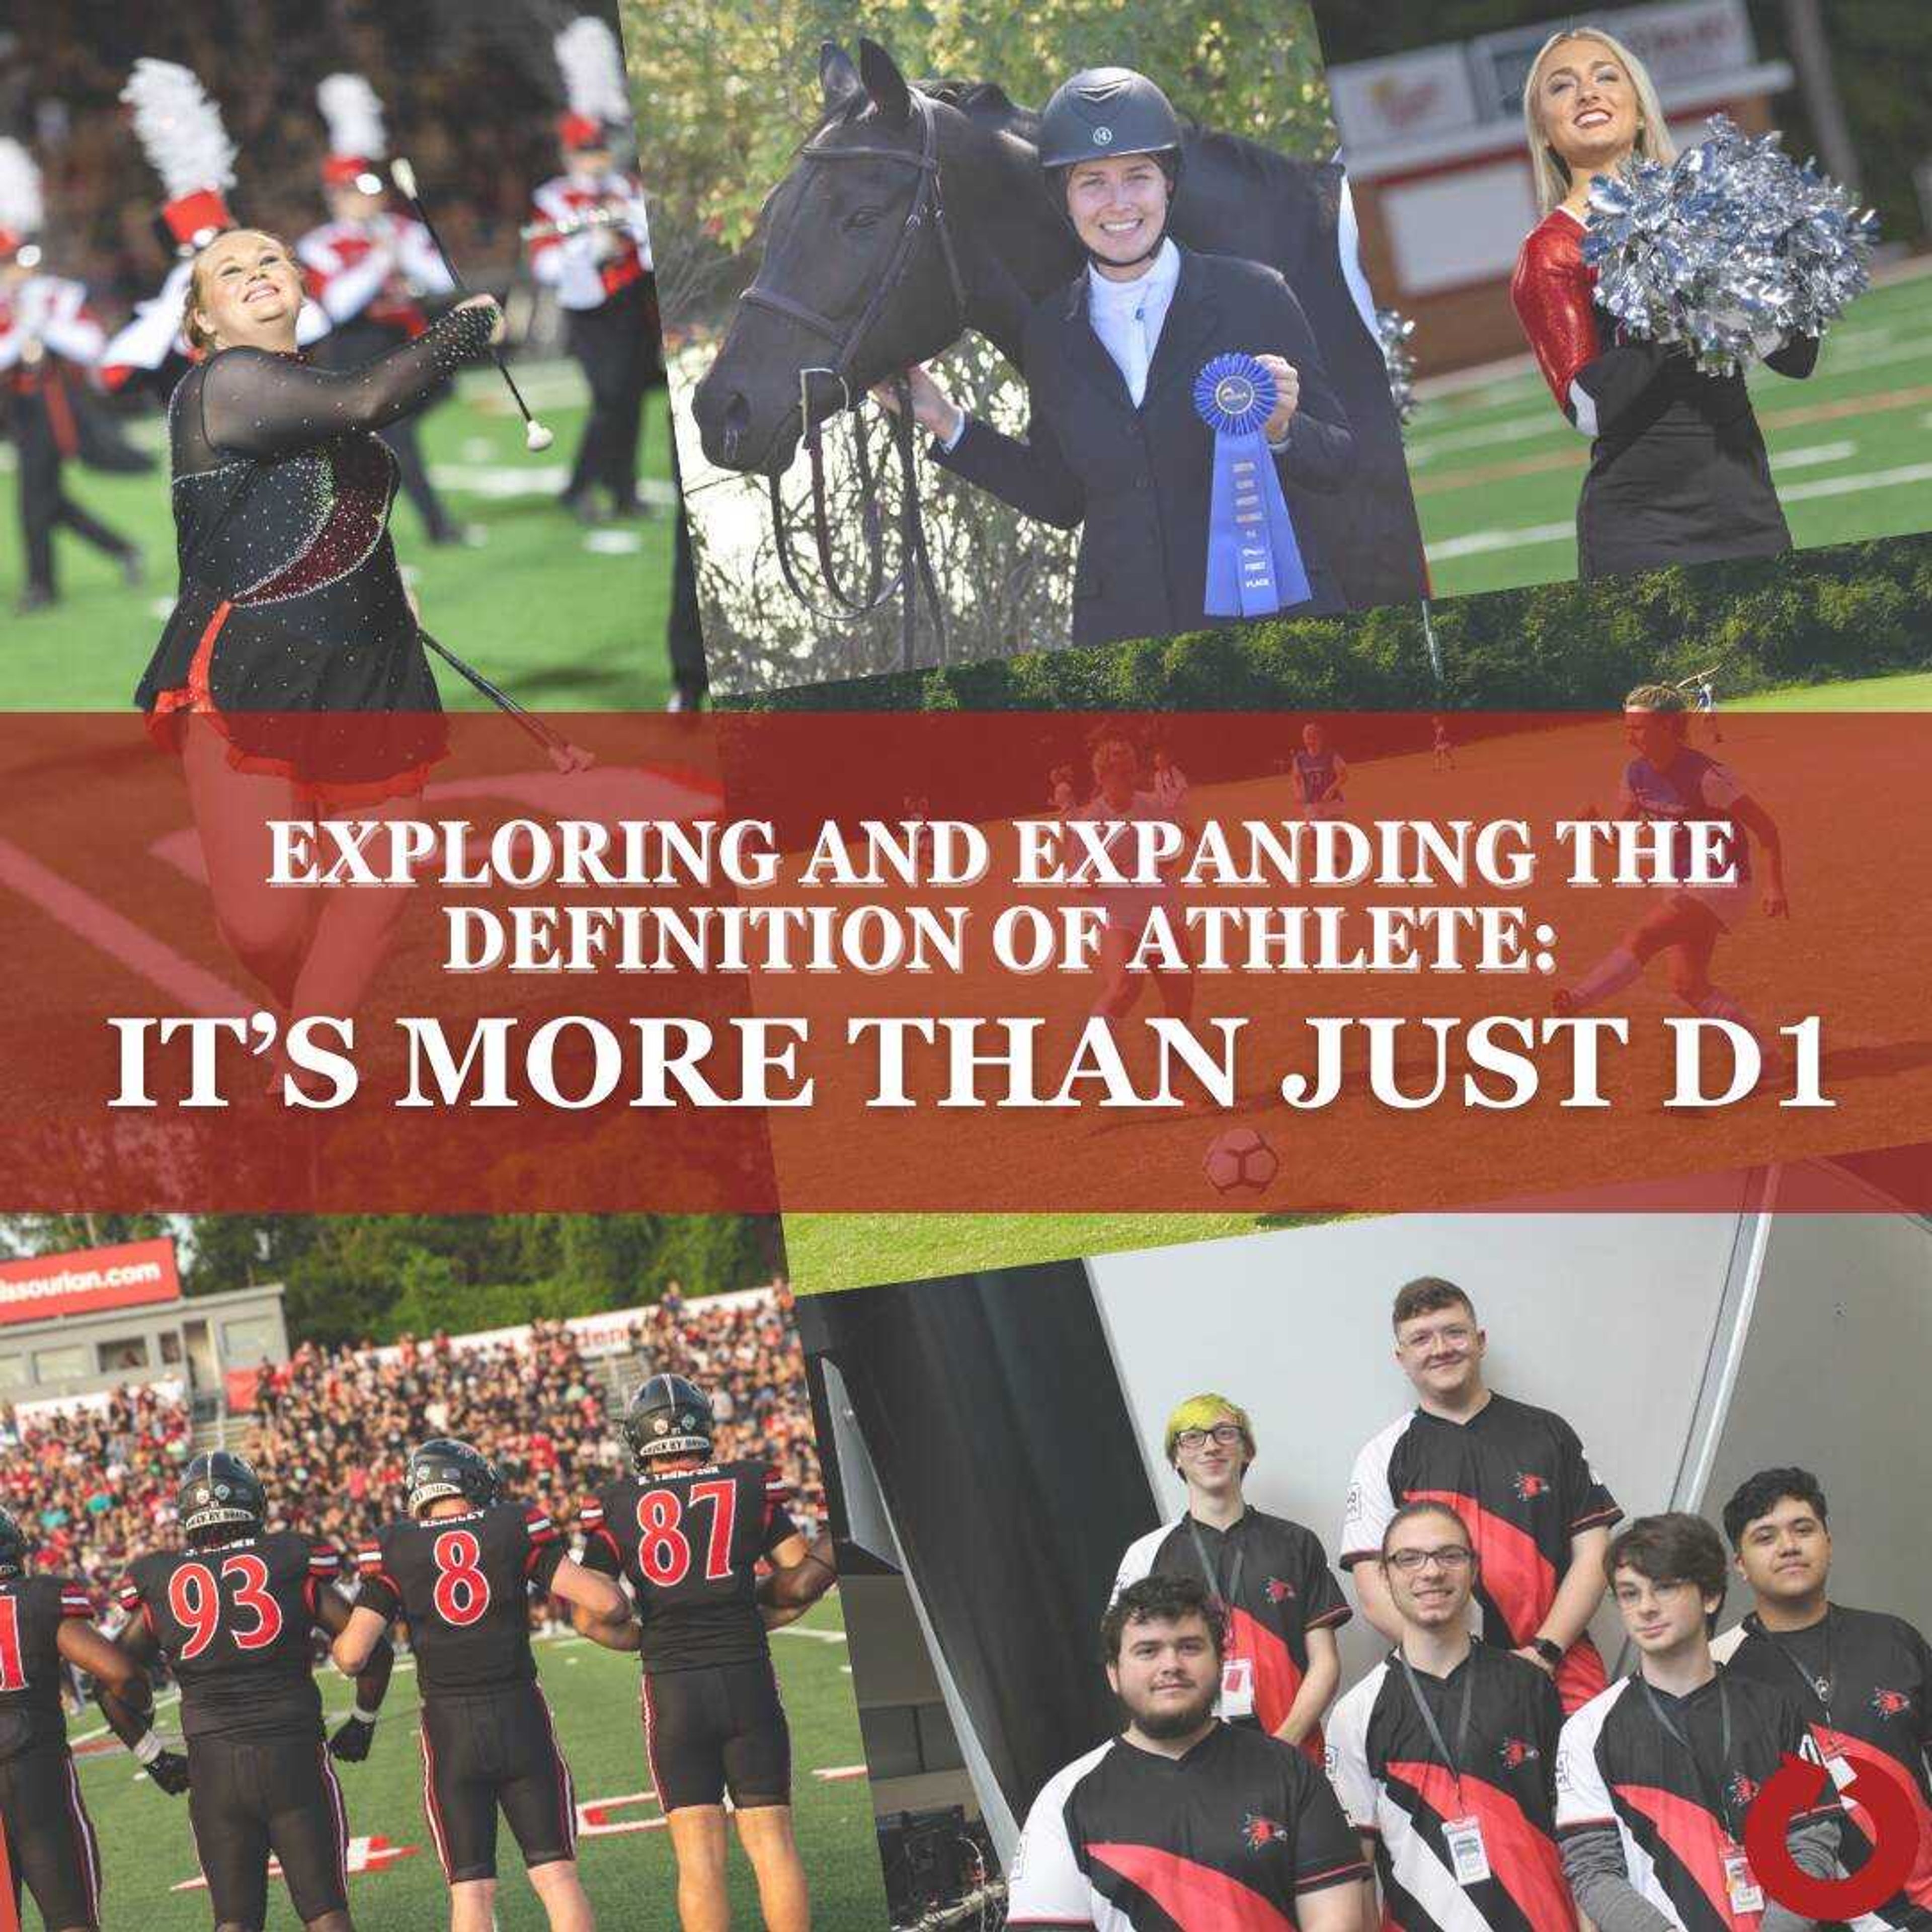 Exploring and expanding the definition of athlete: It’s more than just D1